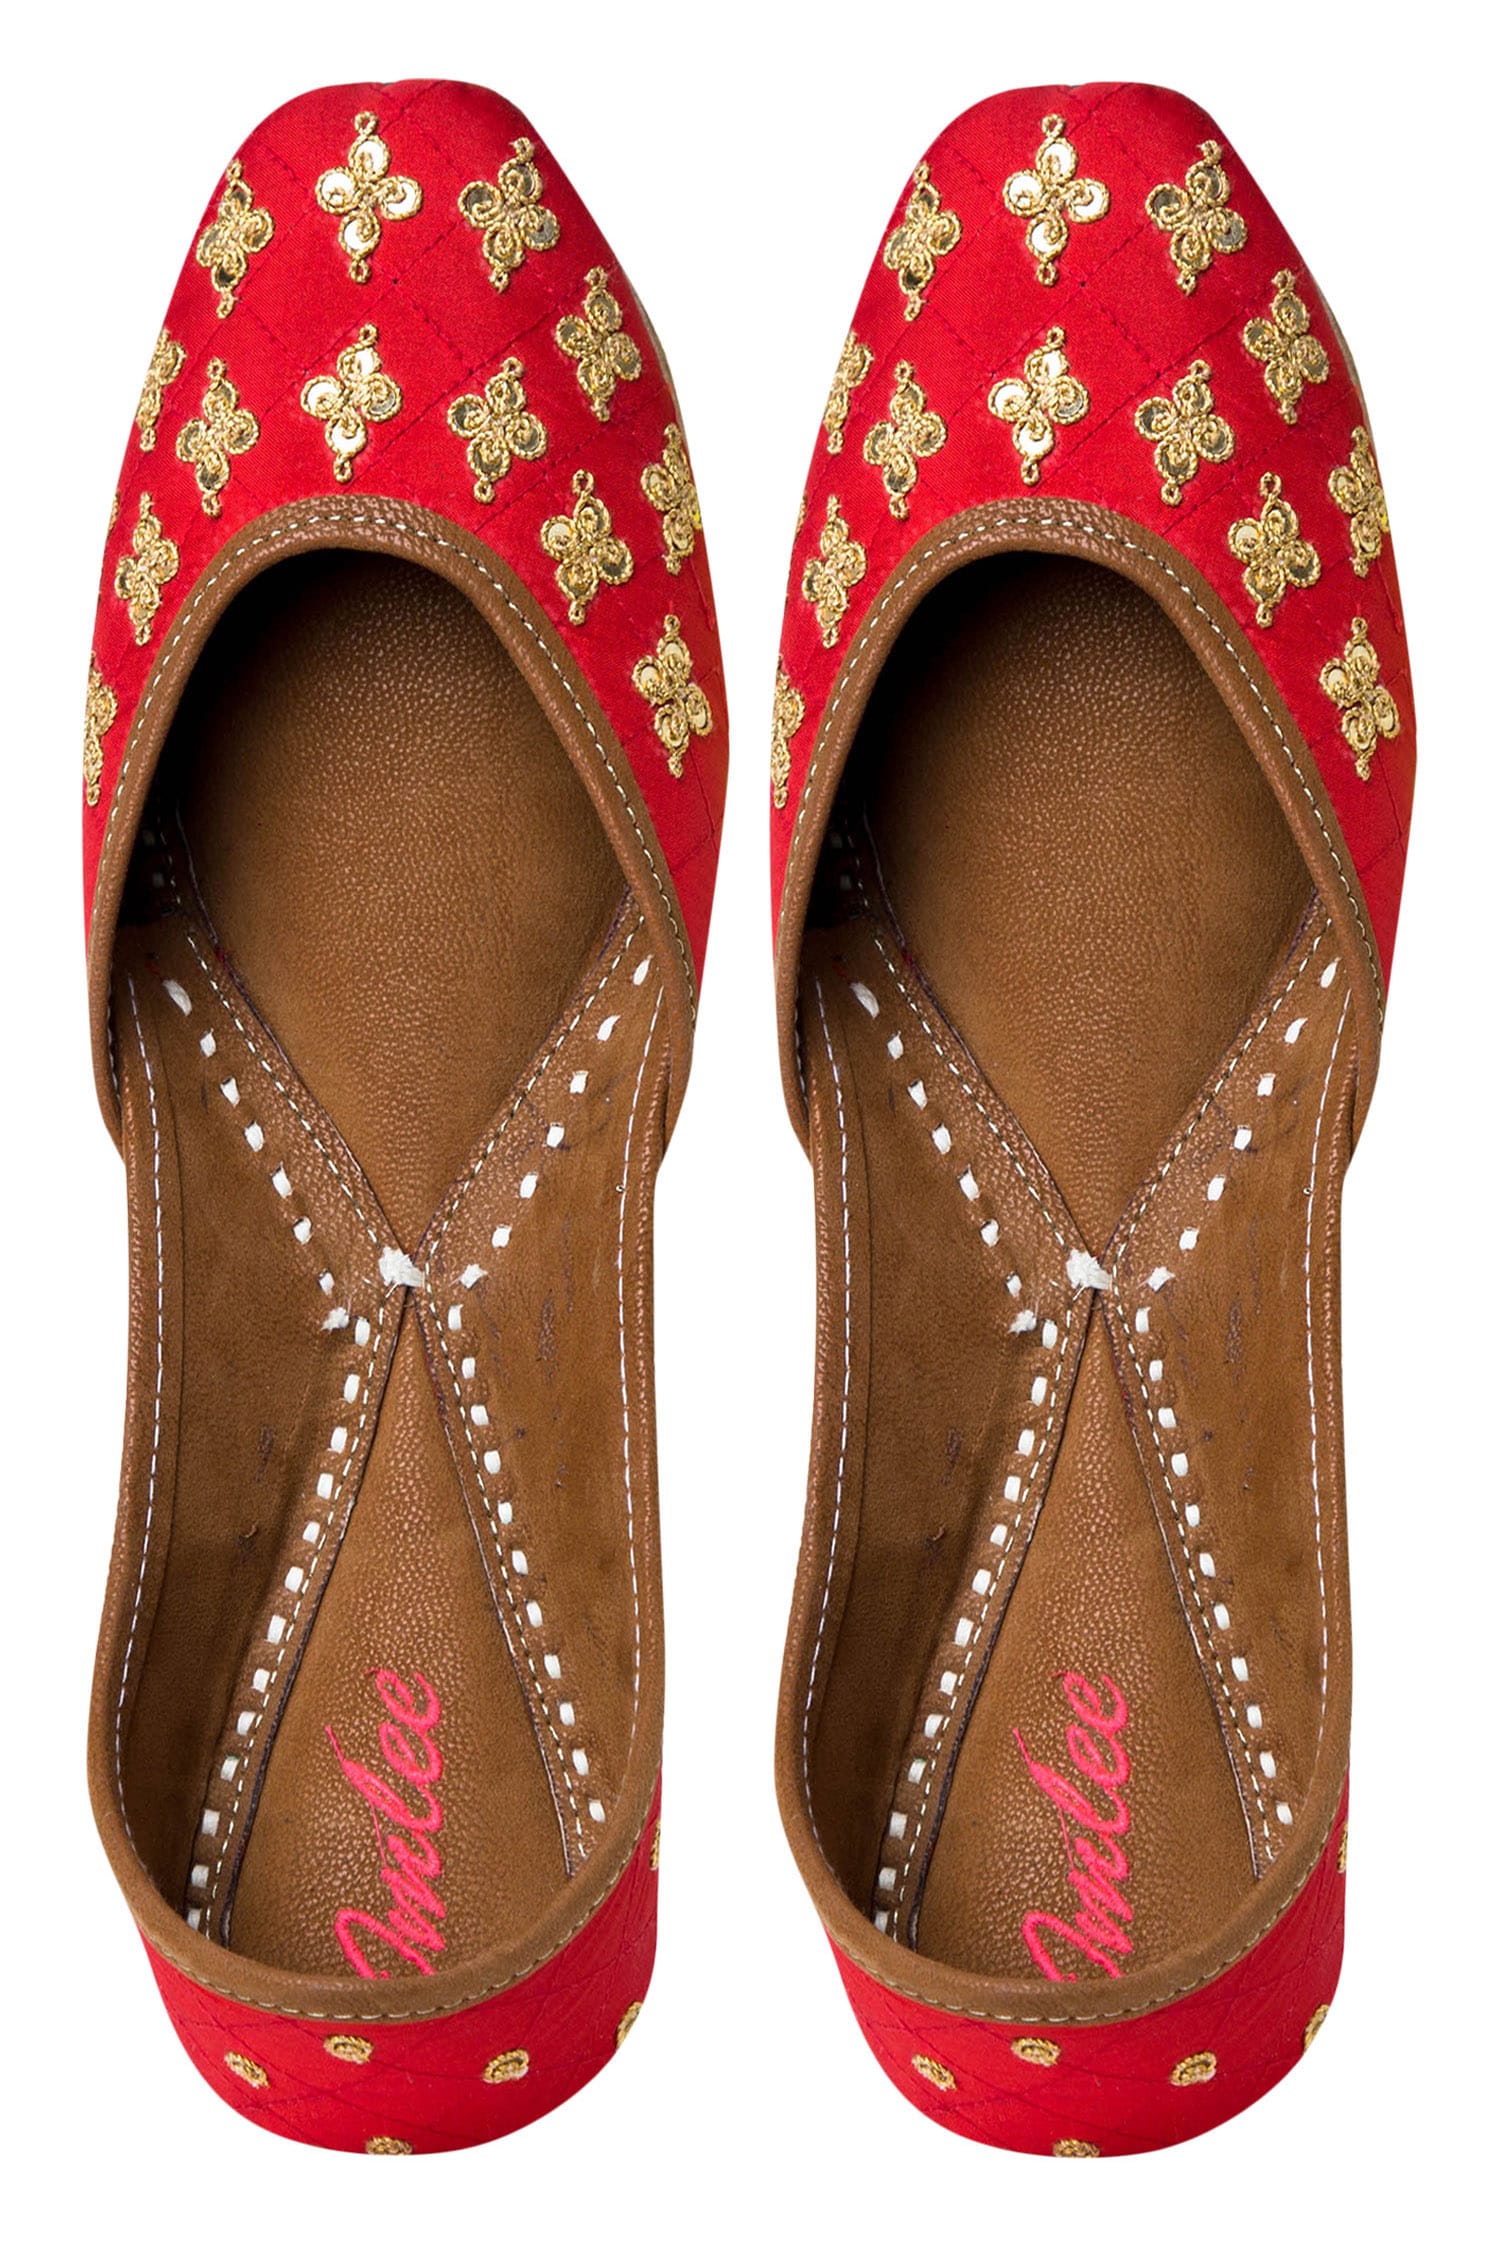 Buy Silk Embroidered Juttis by Imlee Jaipur at Aza Fashions